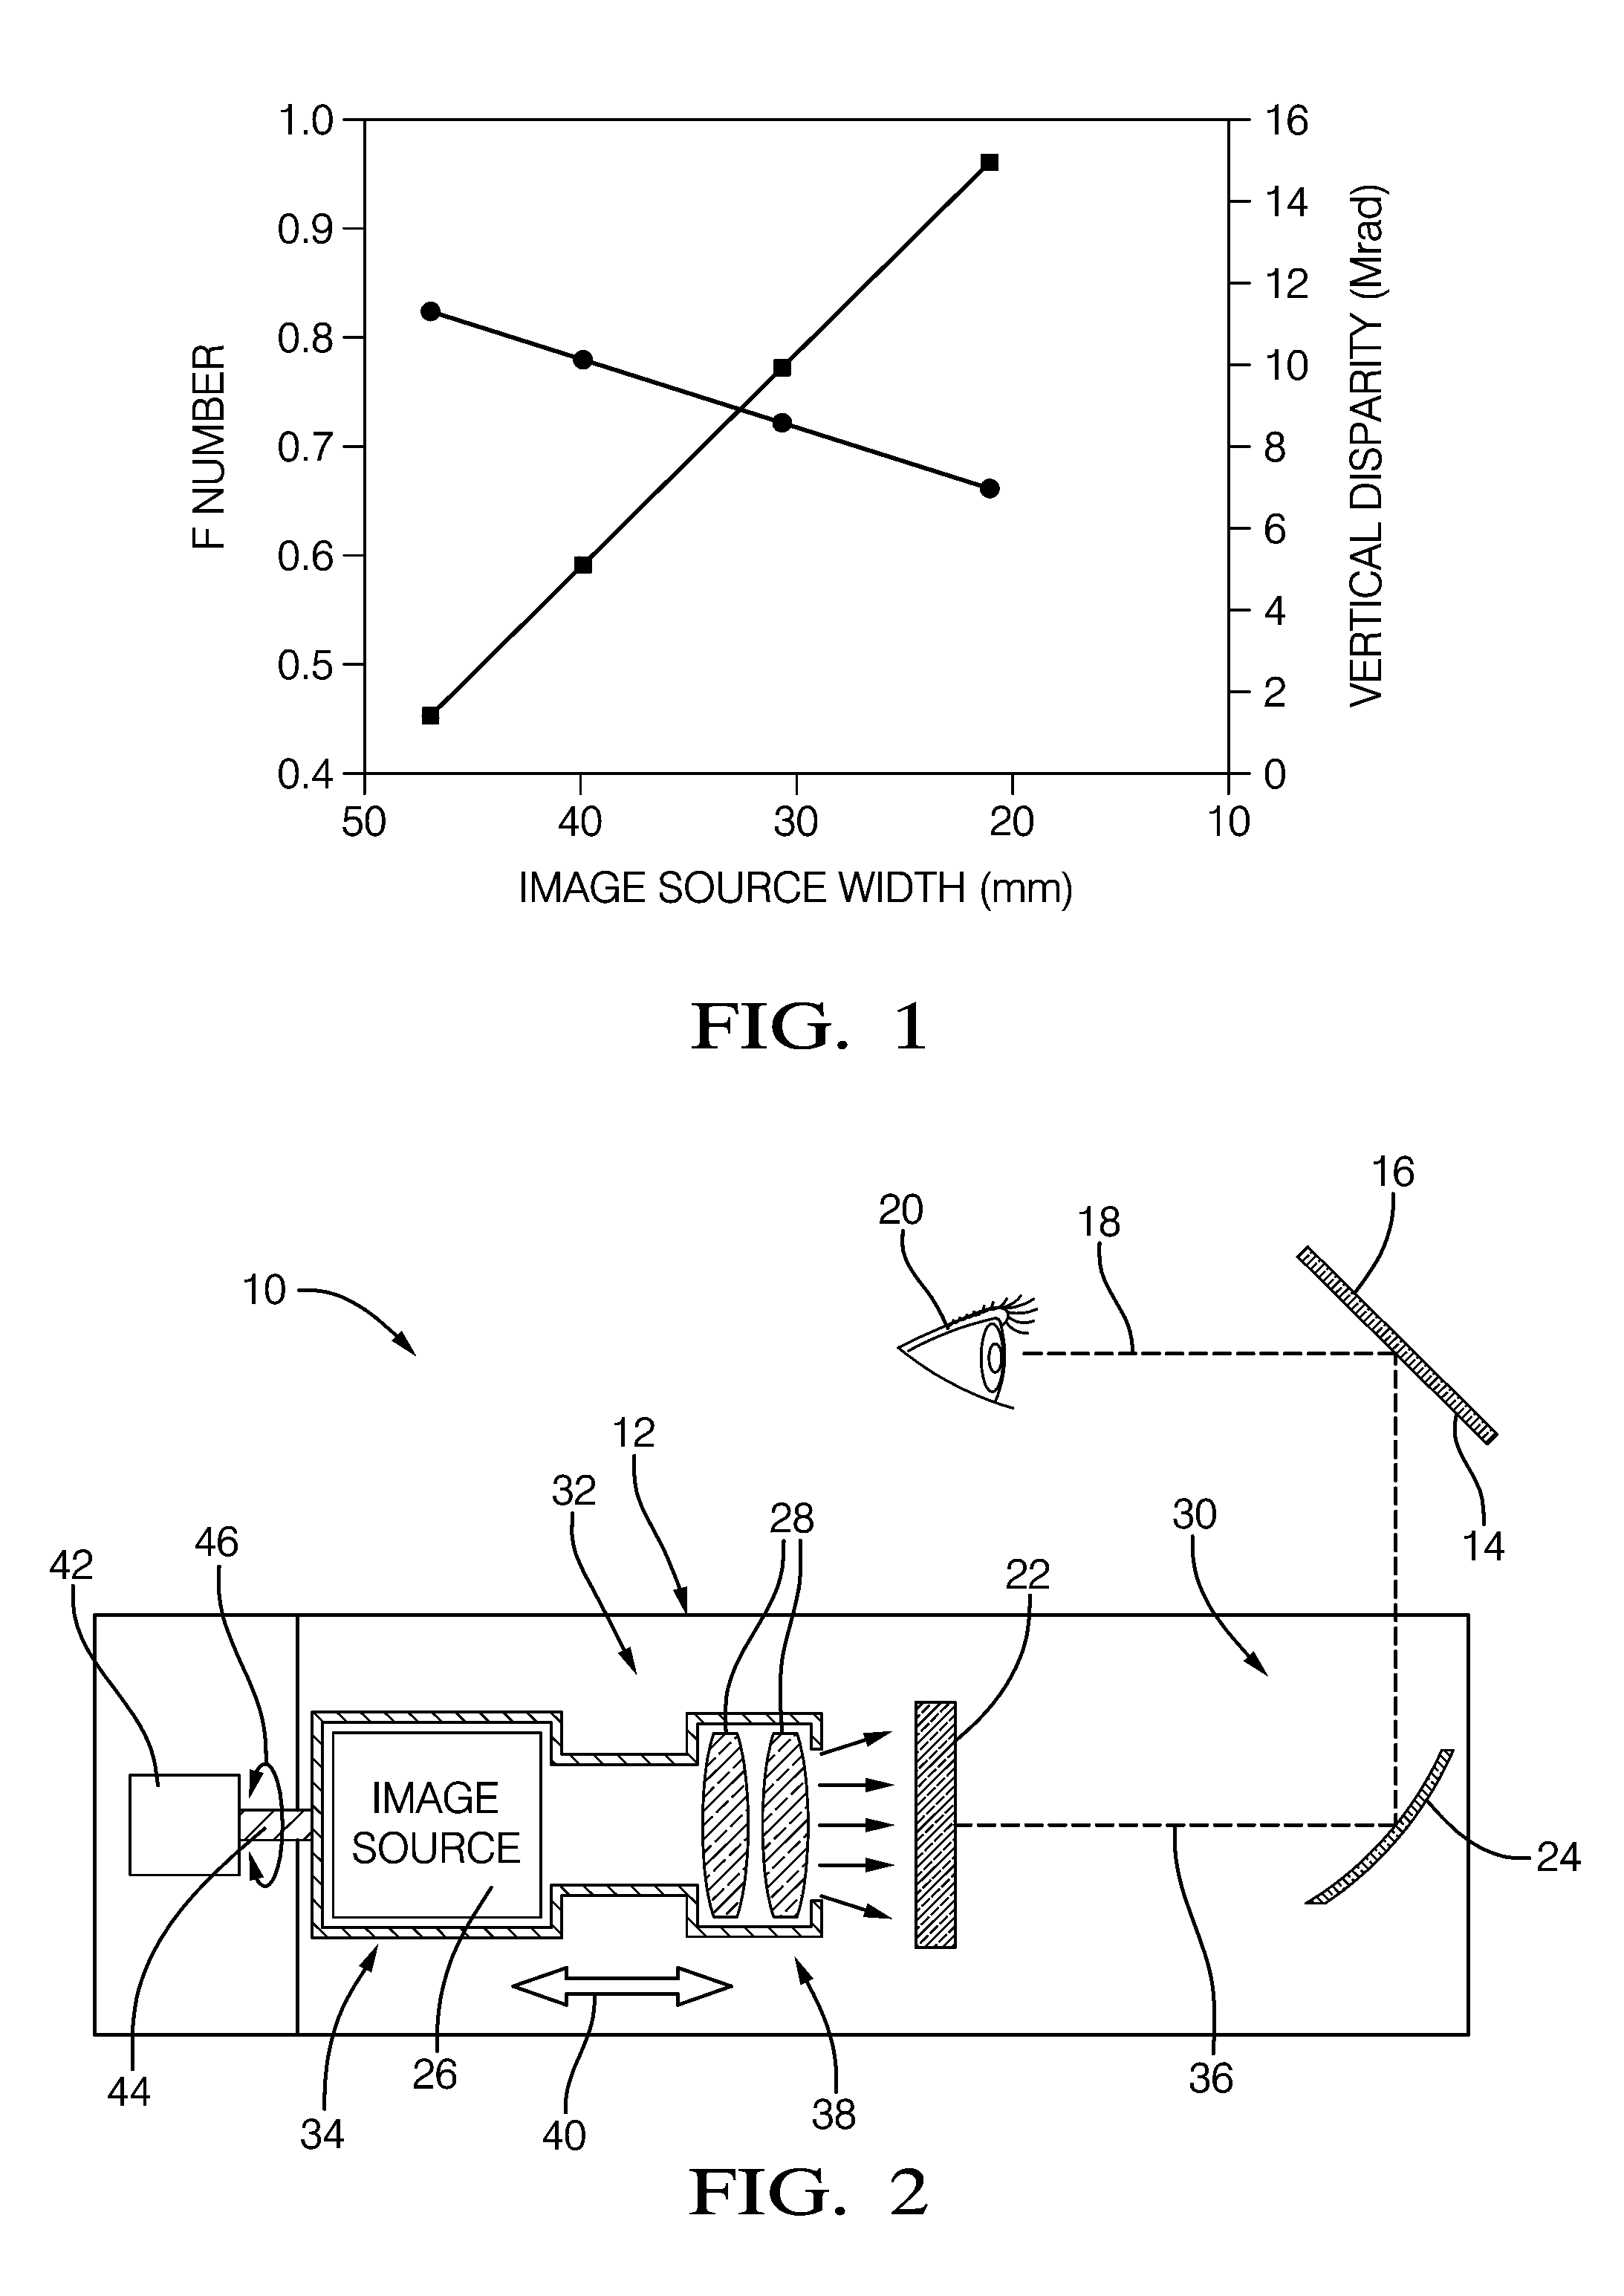 Head-up display system with dynamic image field and brightness control